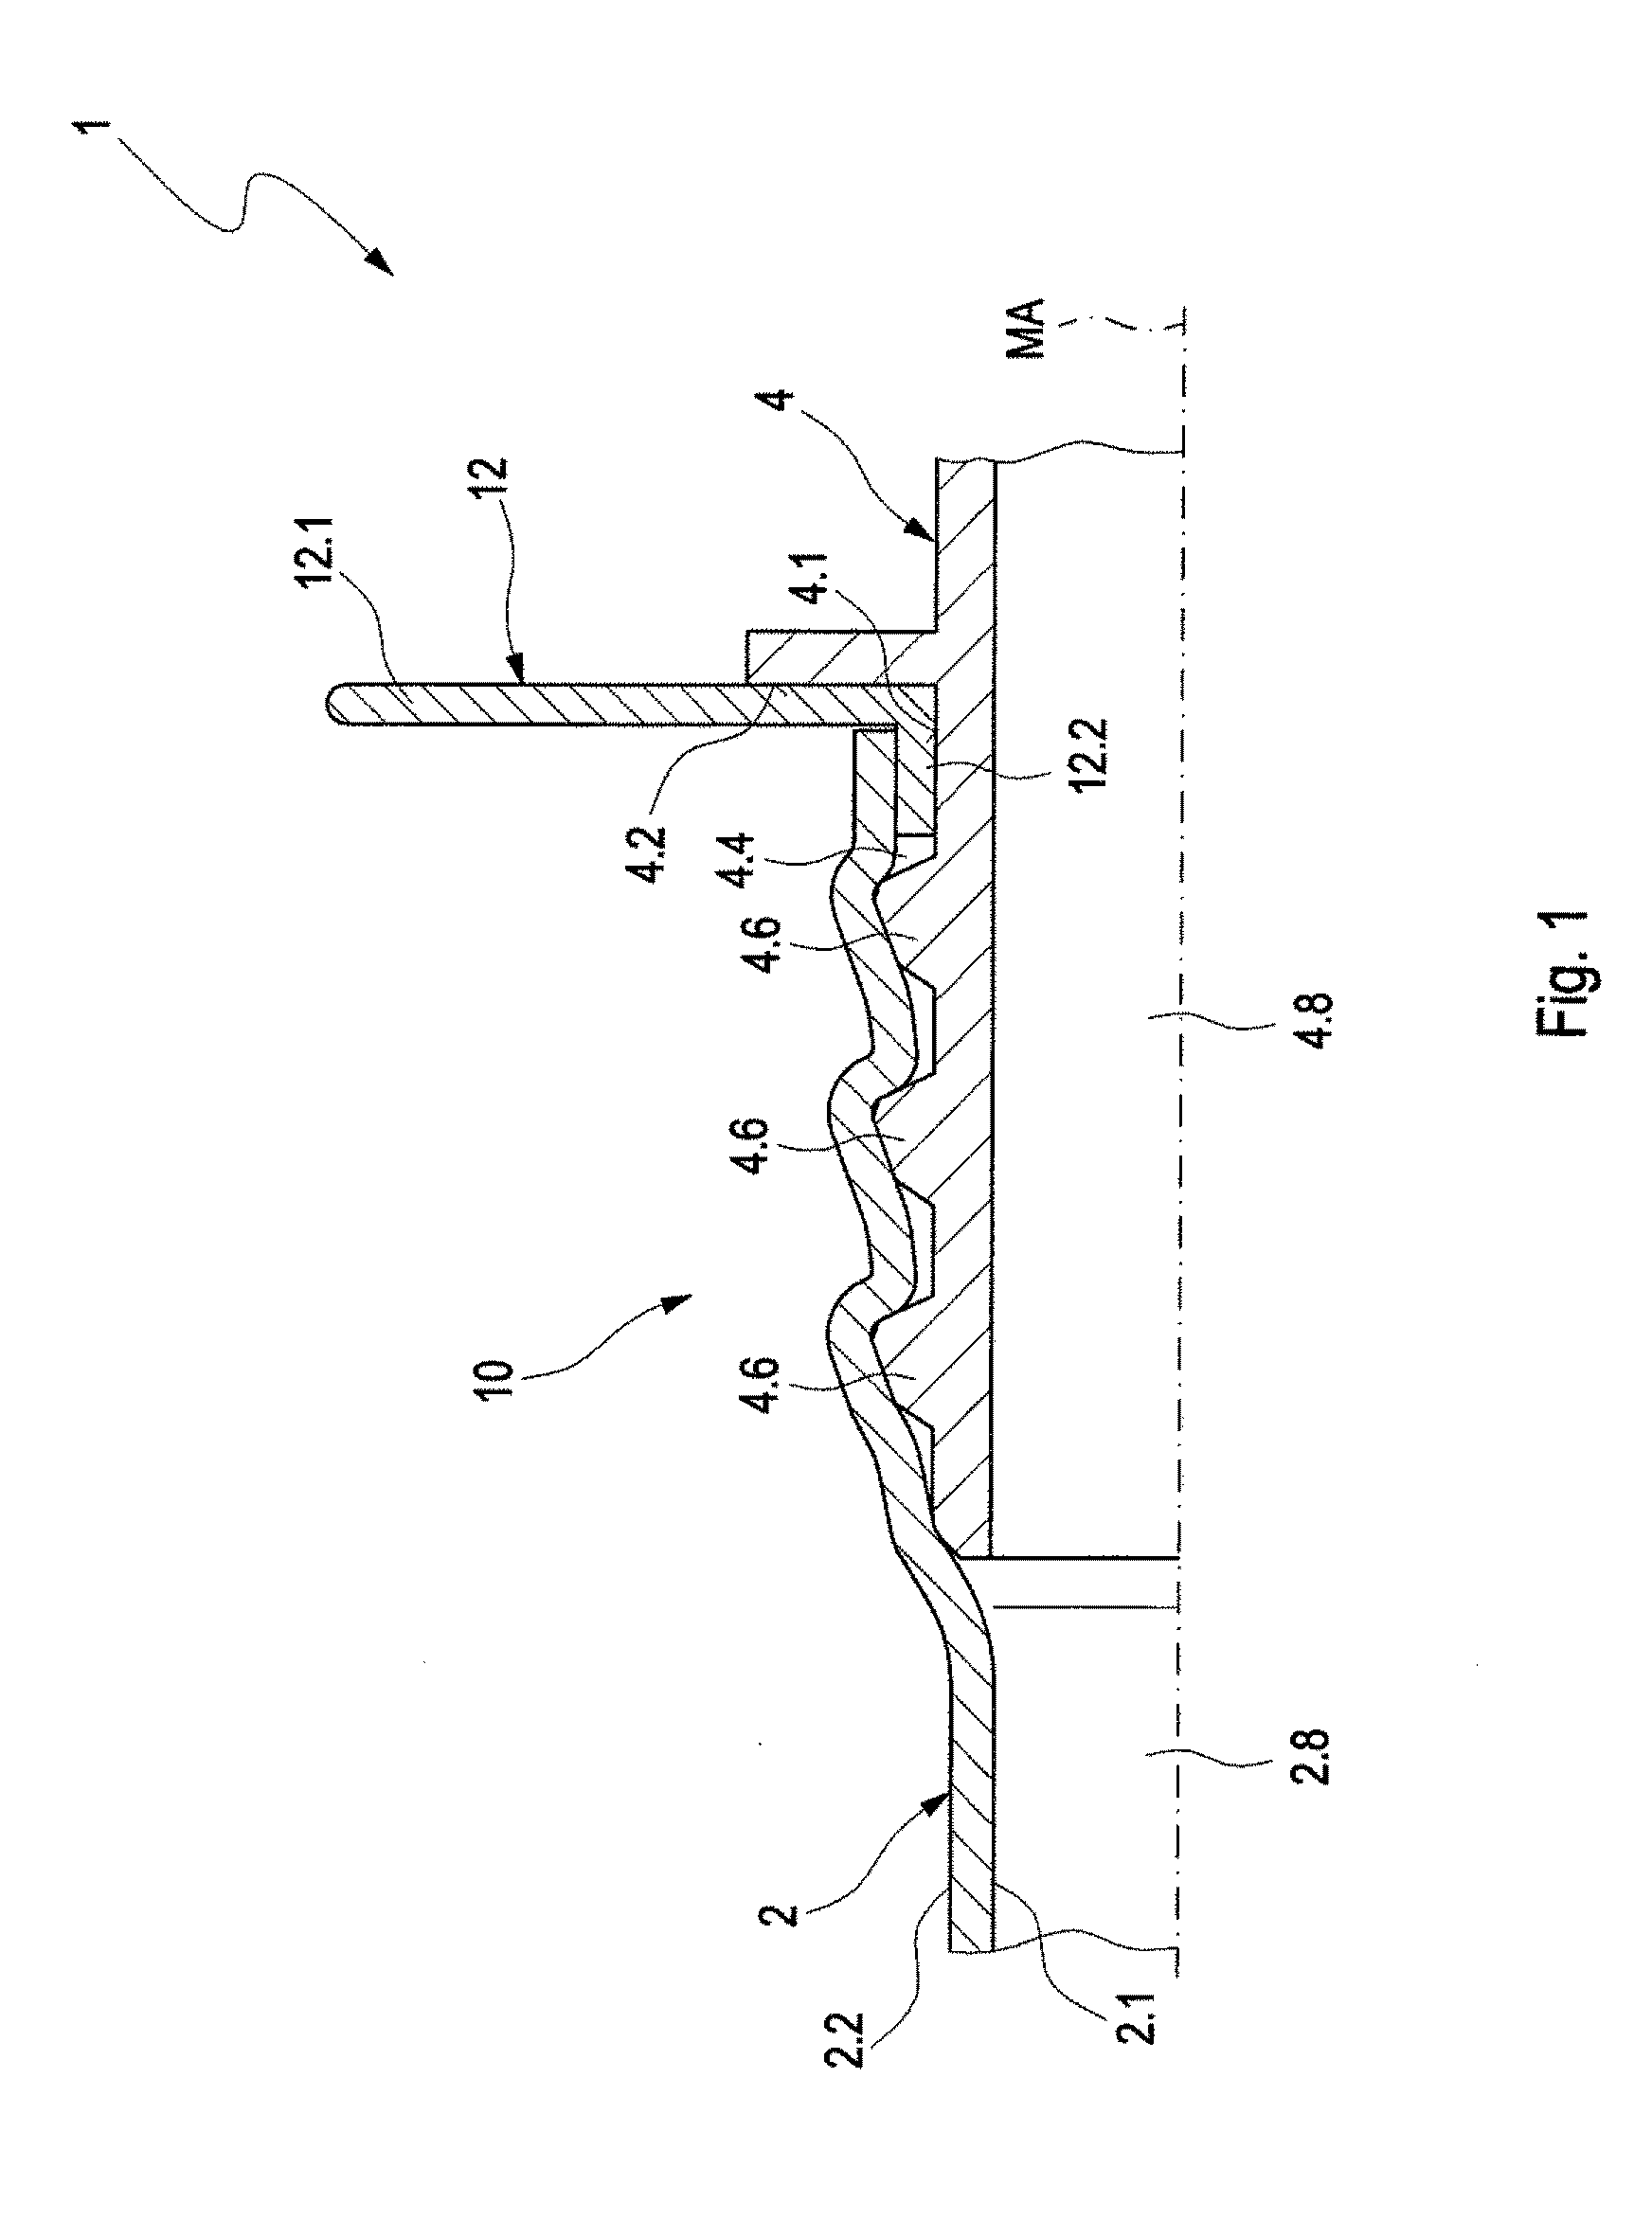 Line system for a vehicle